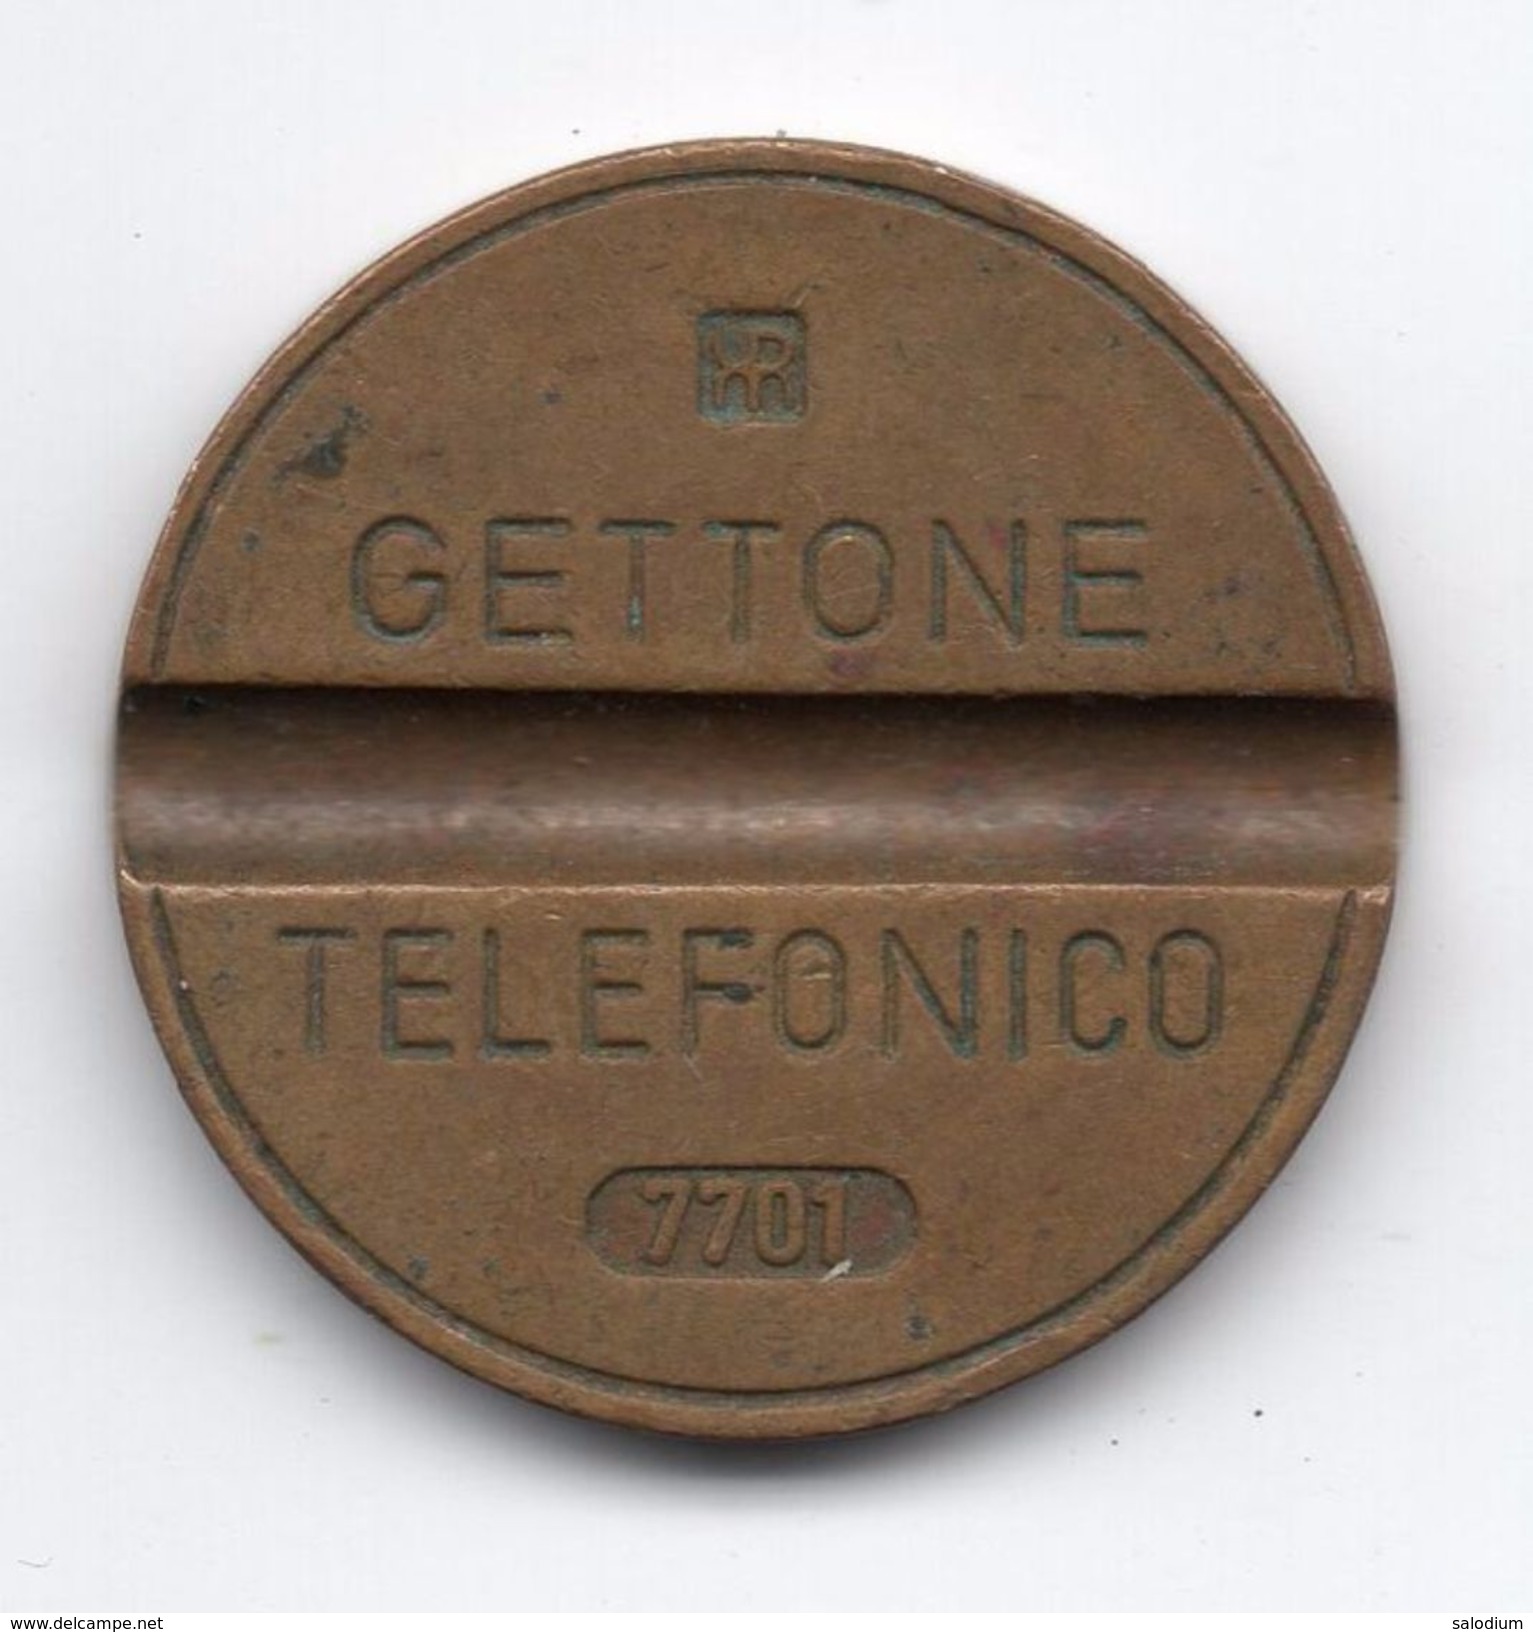 Gettone Telefonico 7701 Token Telephone - (Id-774) - Professionals/Firms